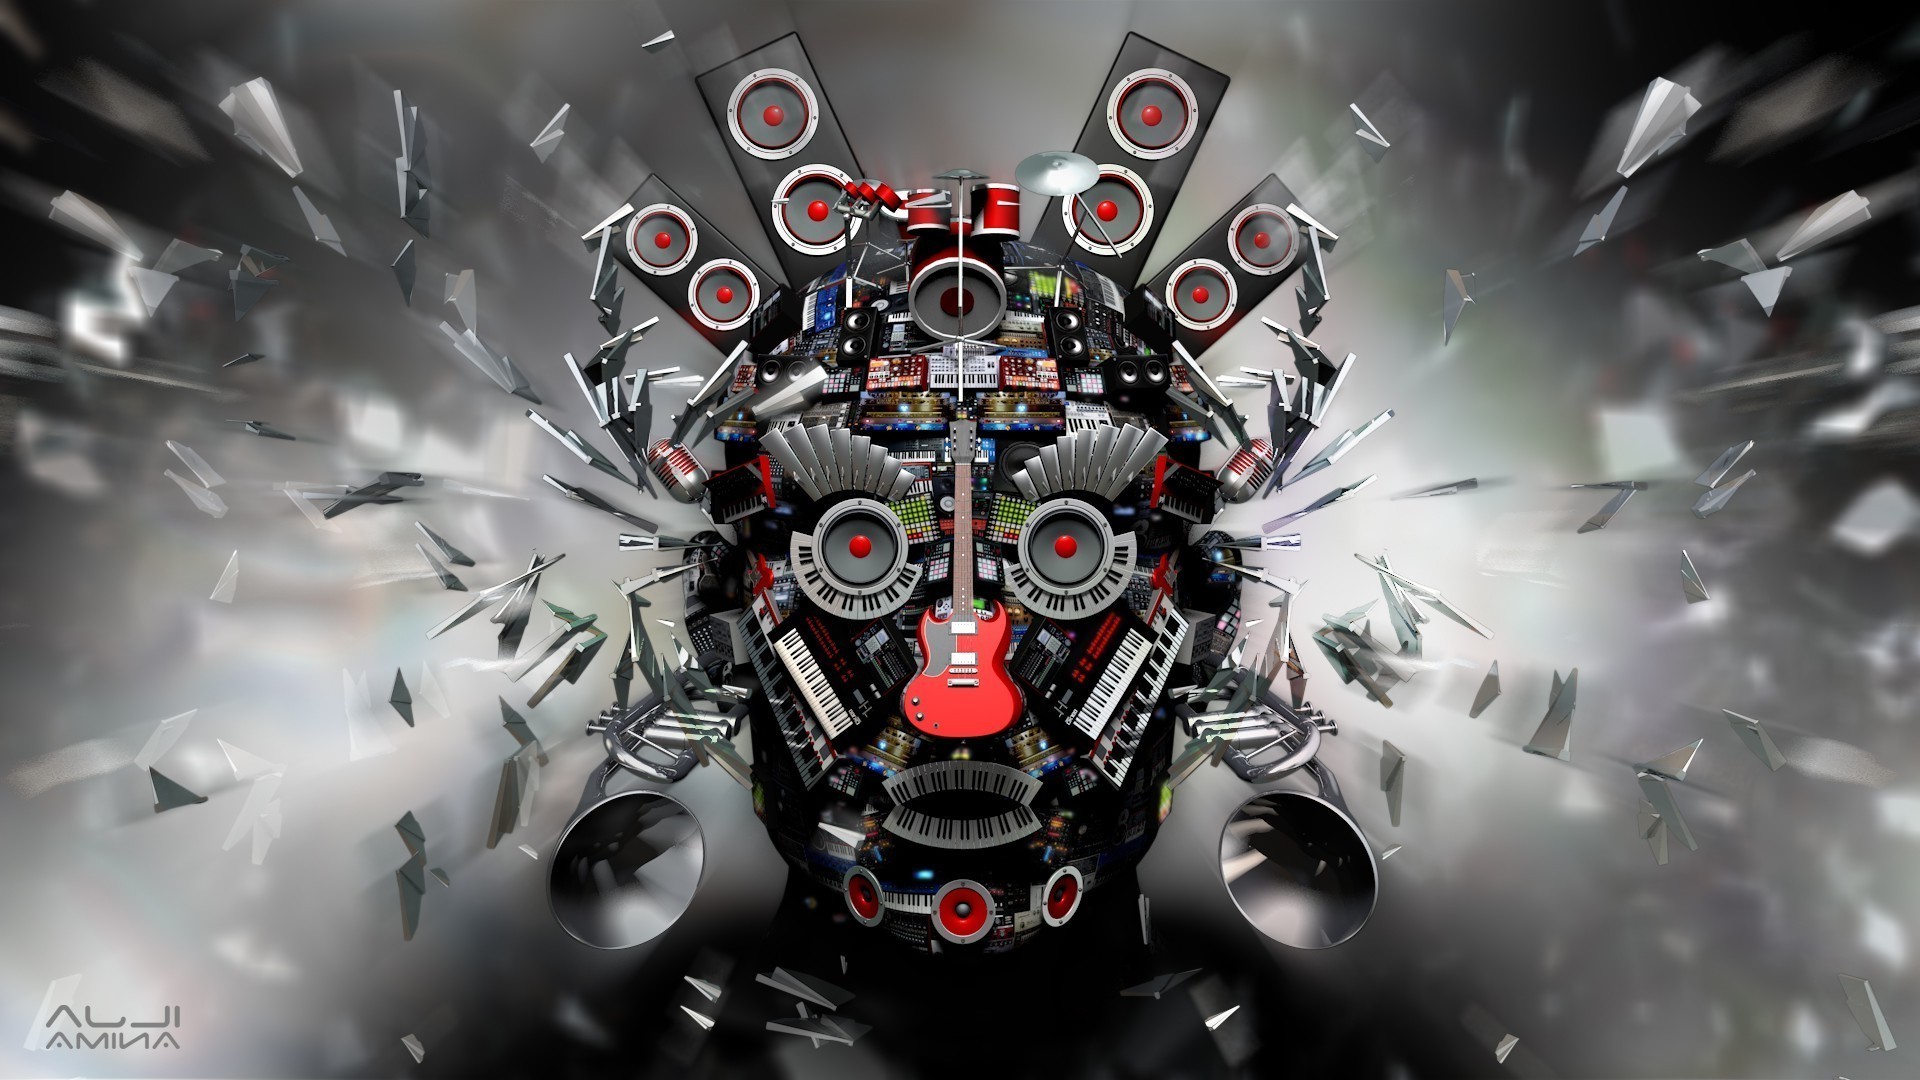 digital Art, 3D, CGI, Face, Music, Guitar, Keyboards, Drums, Microphones, Trumpets, Speakers, Eyes, Open Mouth, Explosion Wallpaper